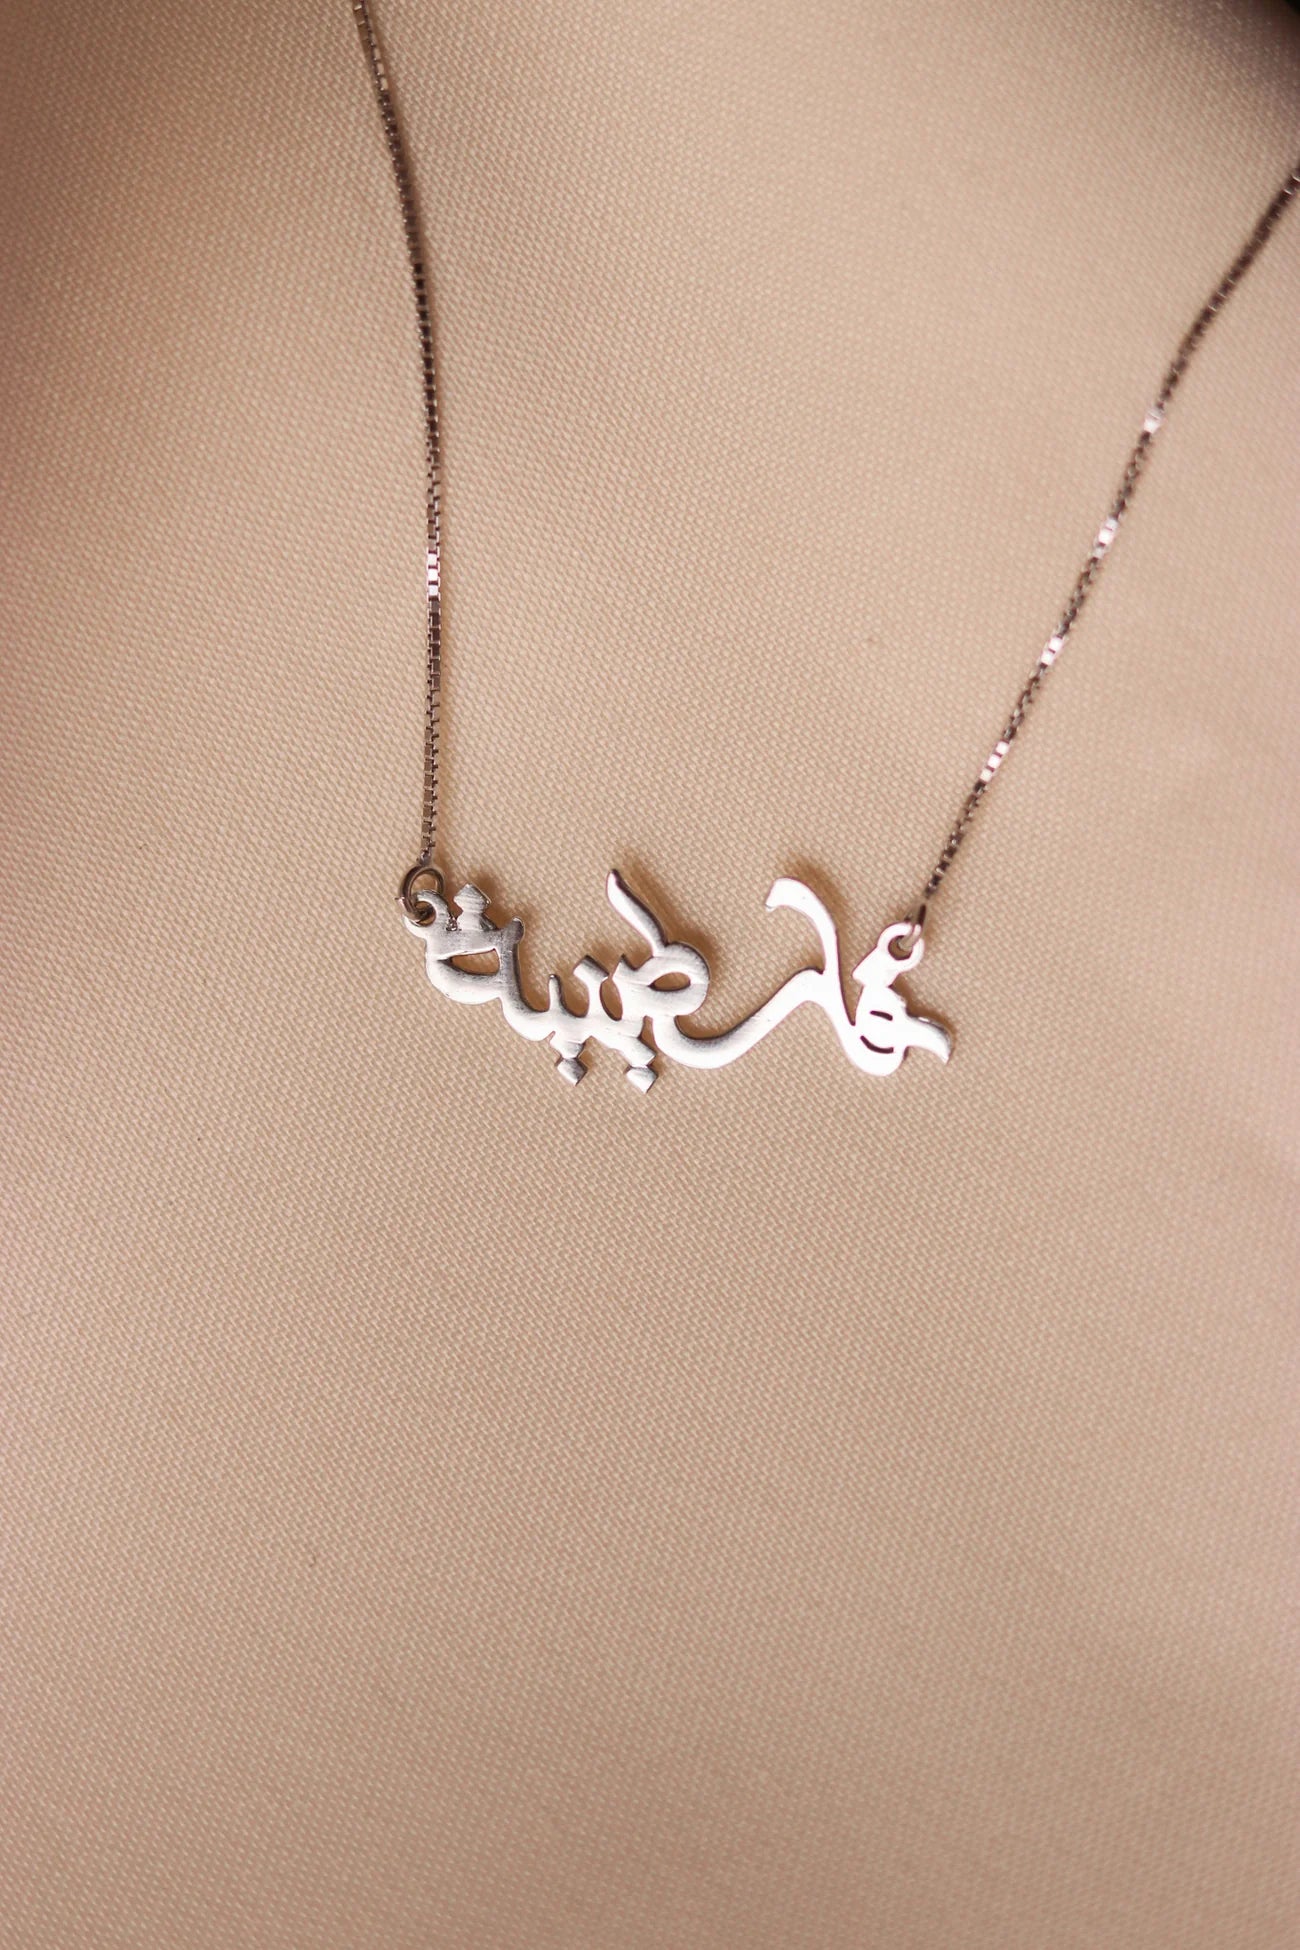 TCB-Necklace(Palestinian word in Arabic)